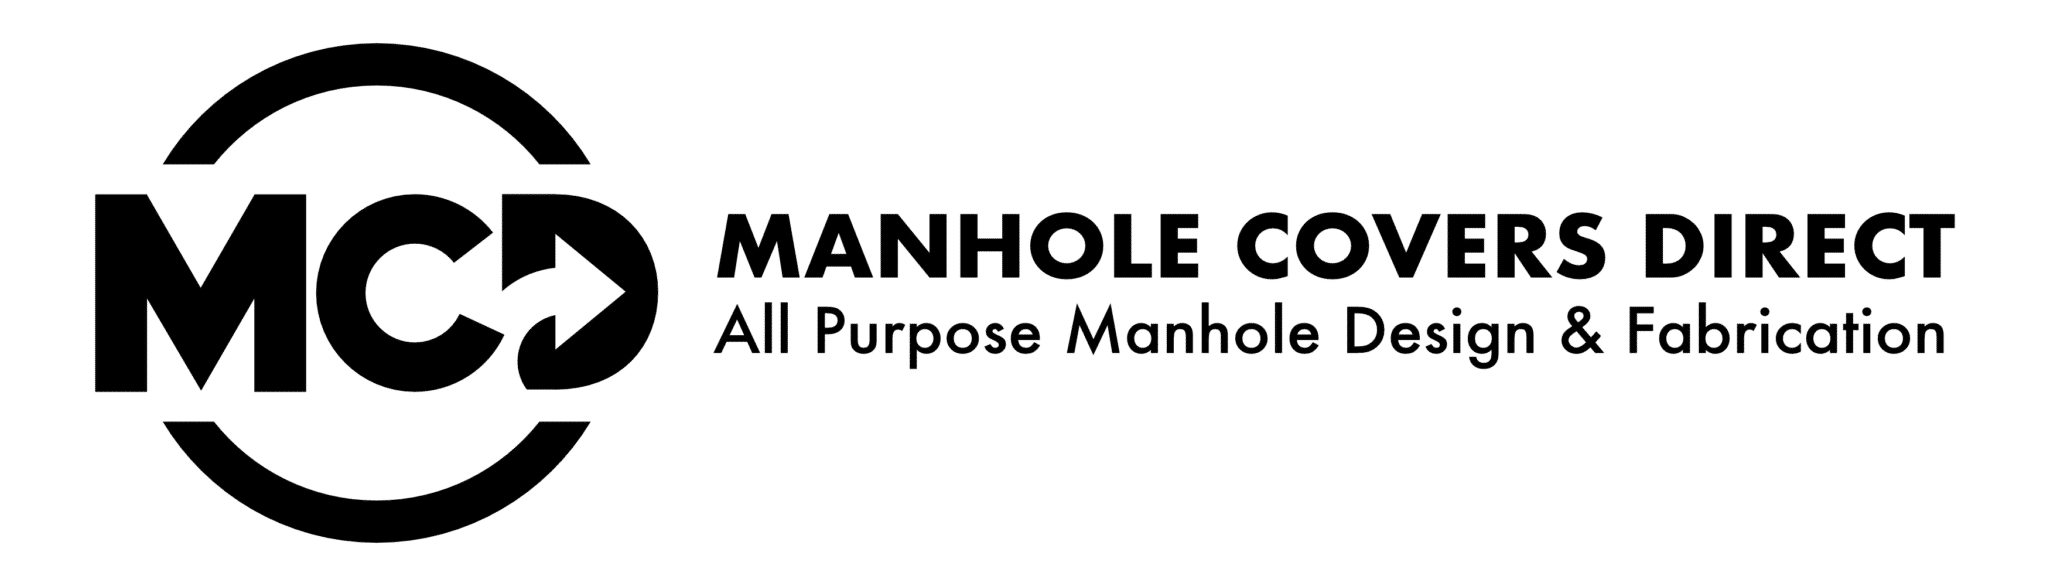 Manhole Covers Direct